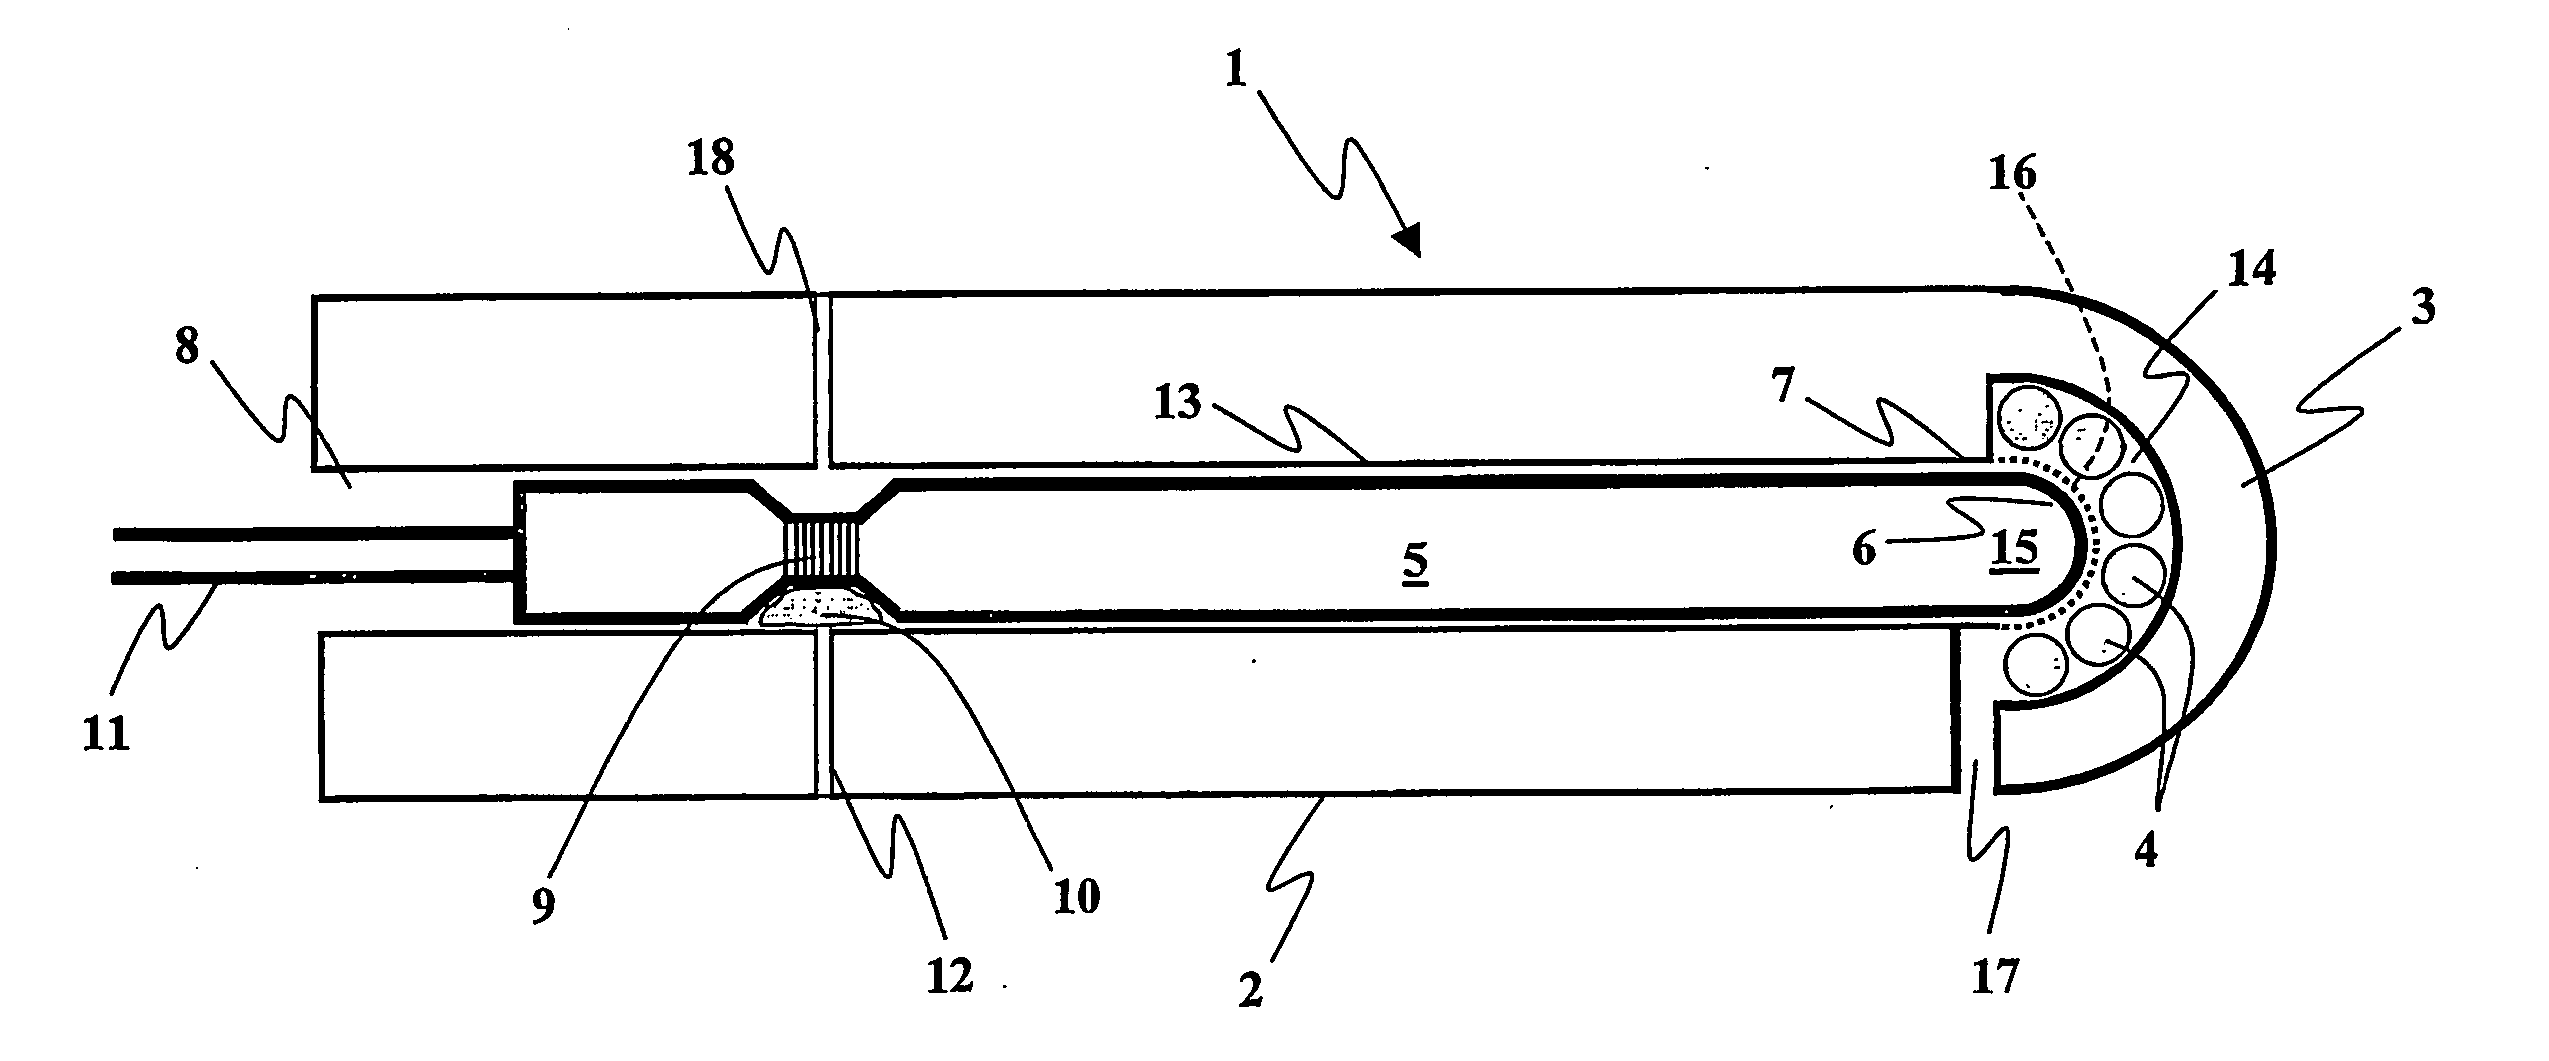 Connector block for shock tubes and method of securing a detonator therein